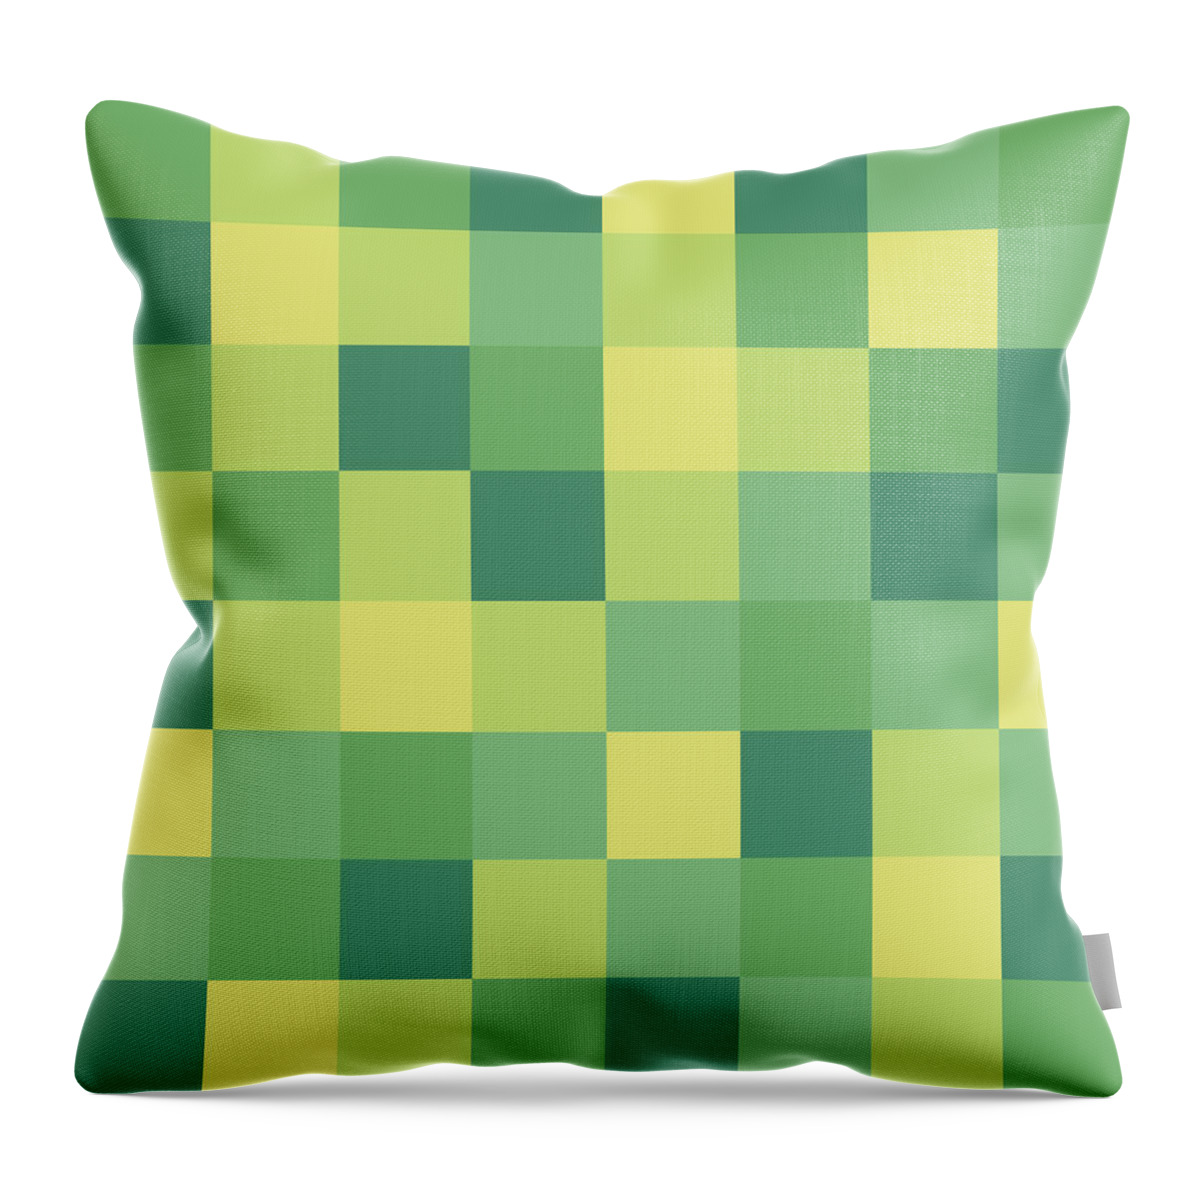 Abstract Throw Pillow featuring the digital art Pixel Art #160 by Mike Taylor